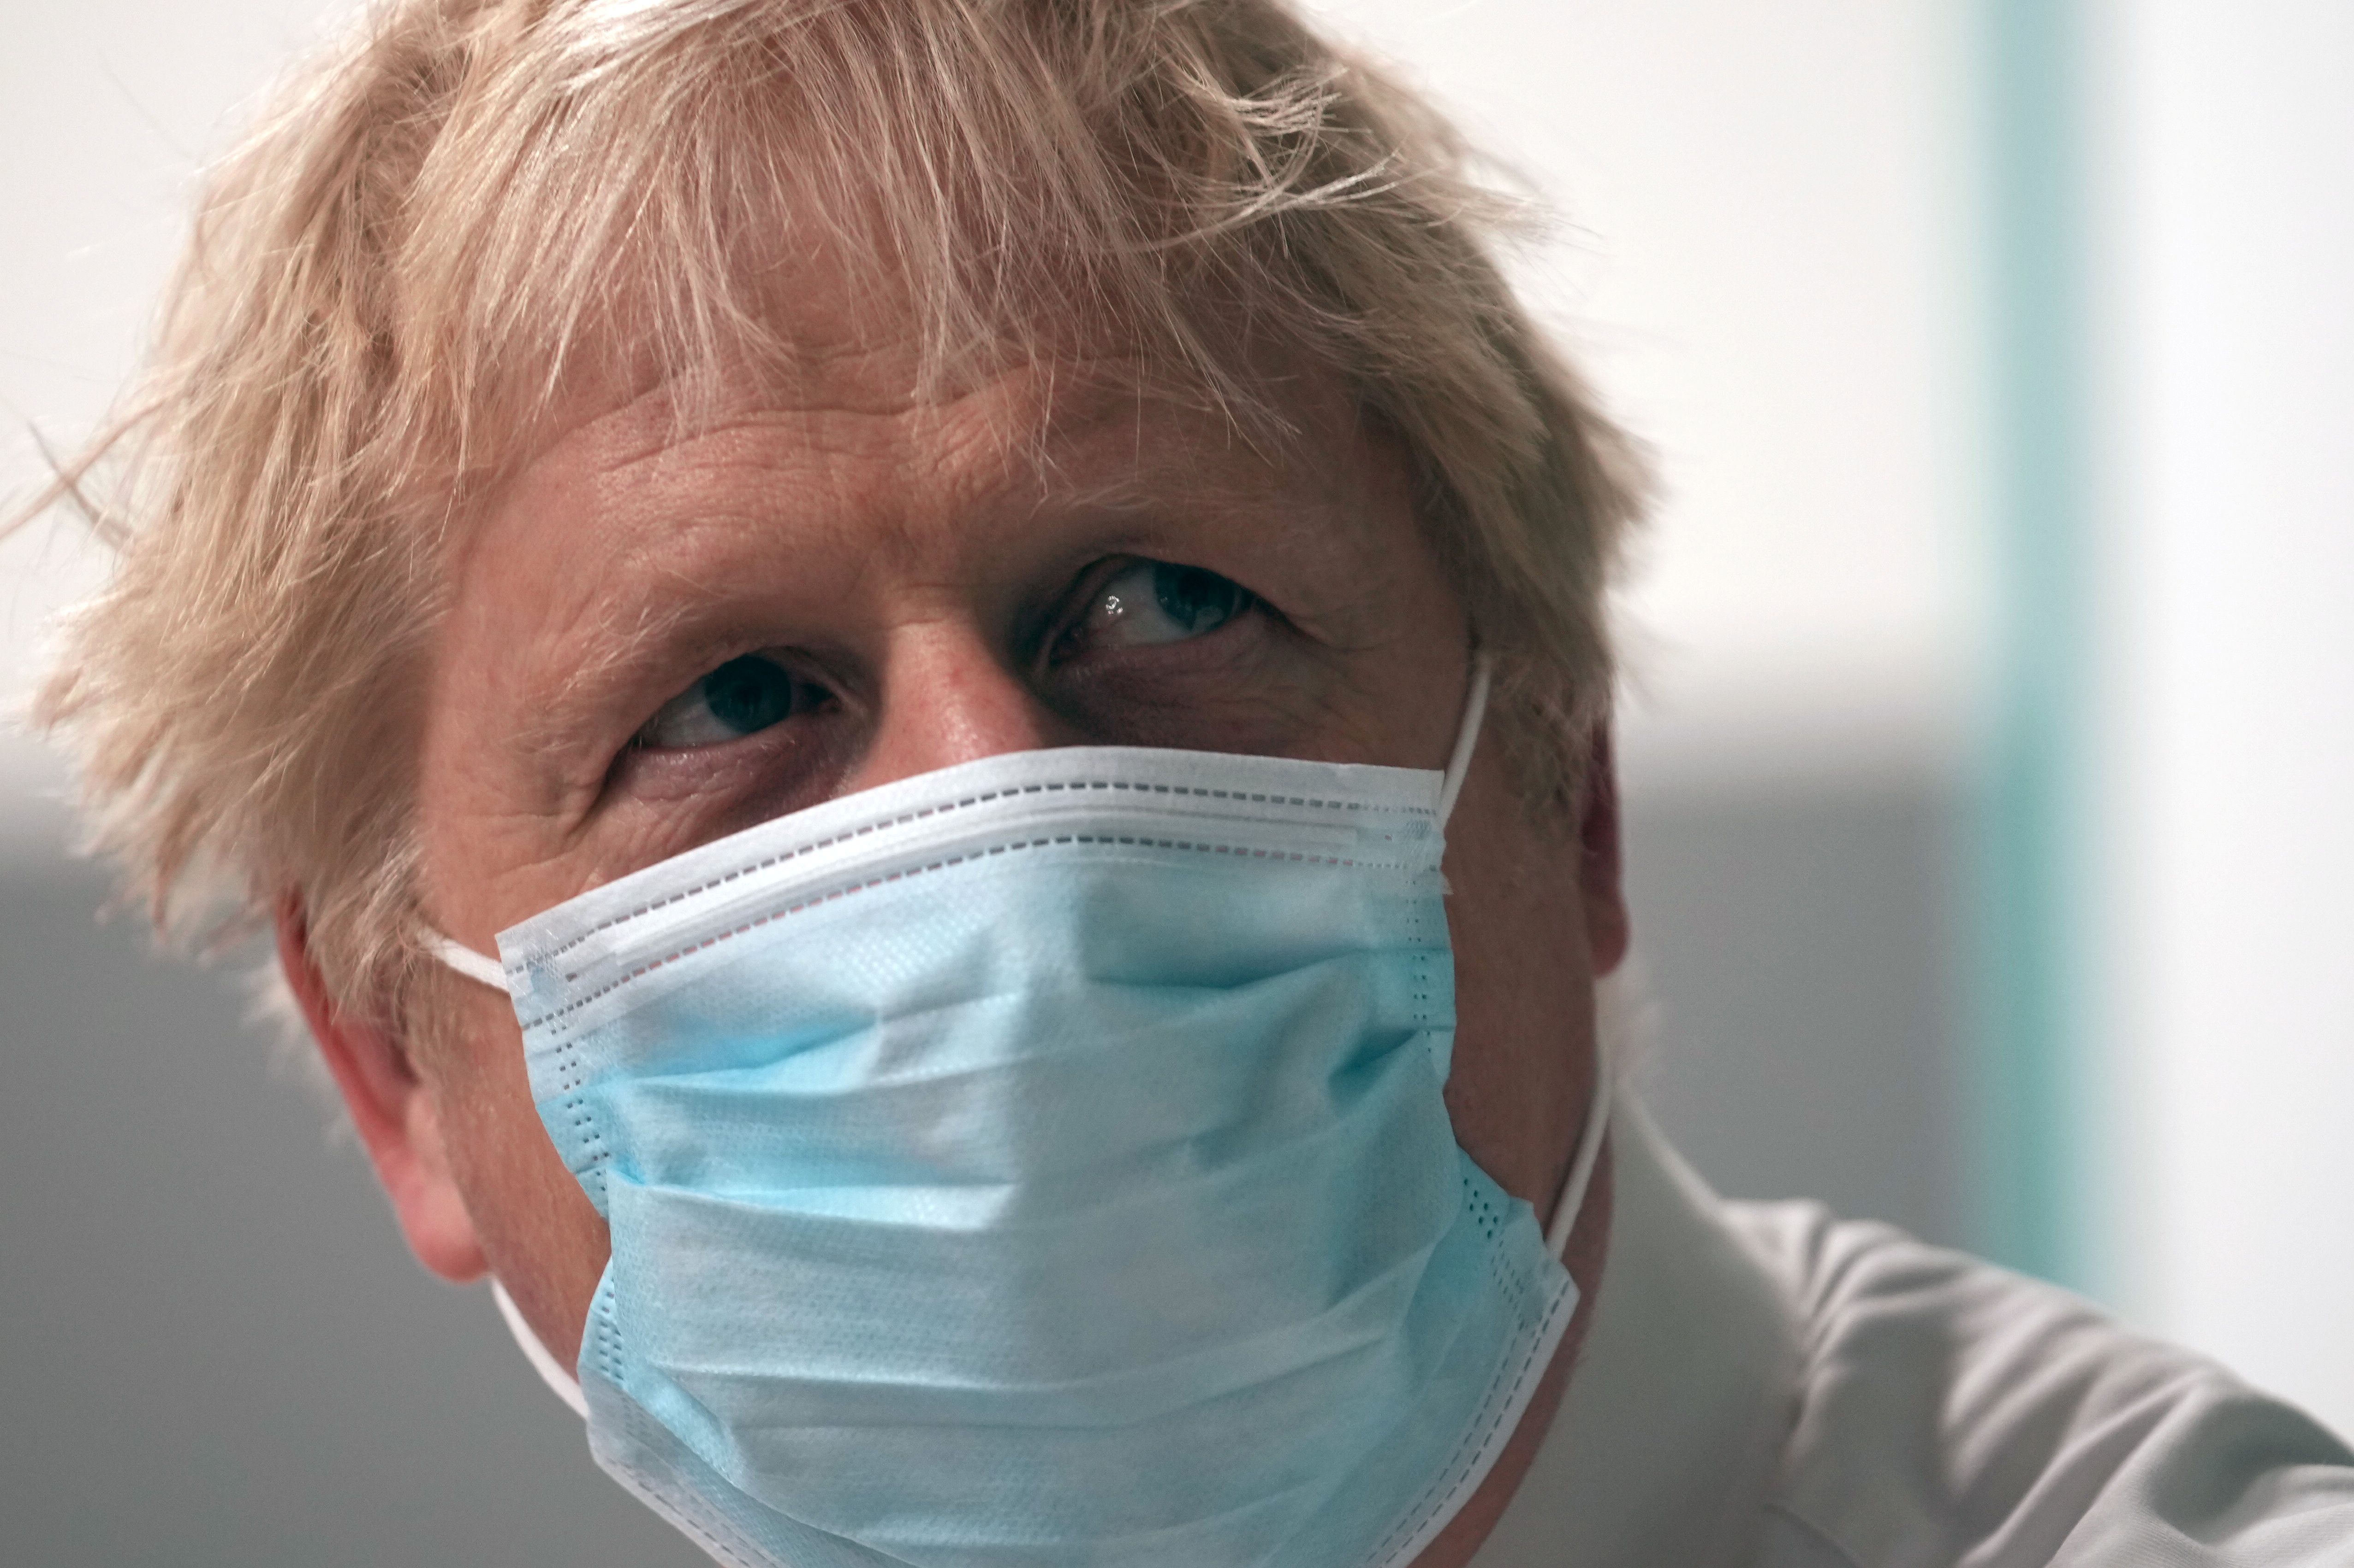 Prime Minister Boris Johnson looks on during a visit at Leeds General Infirmary, in Leeds, Britain October 2, 2021. Christopher Furlong/Pool via REUTERS